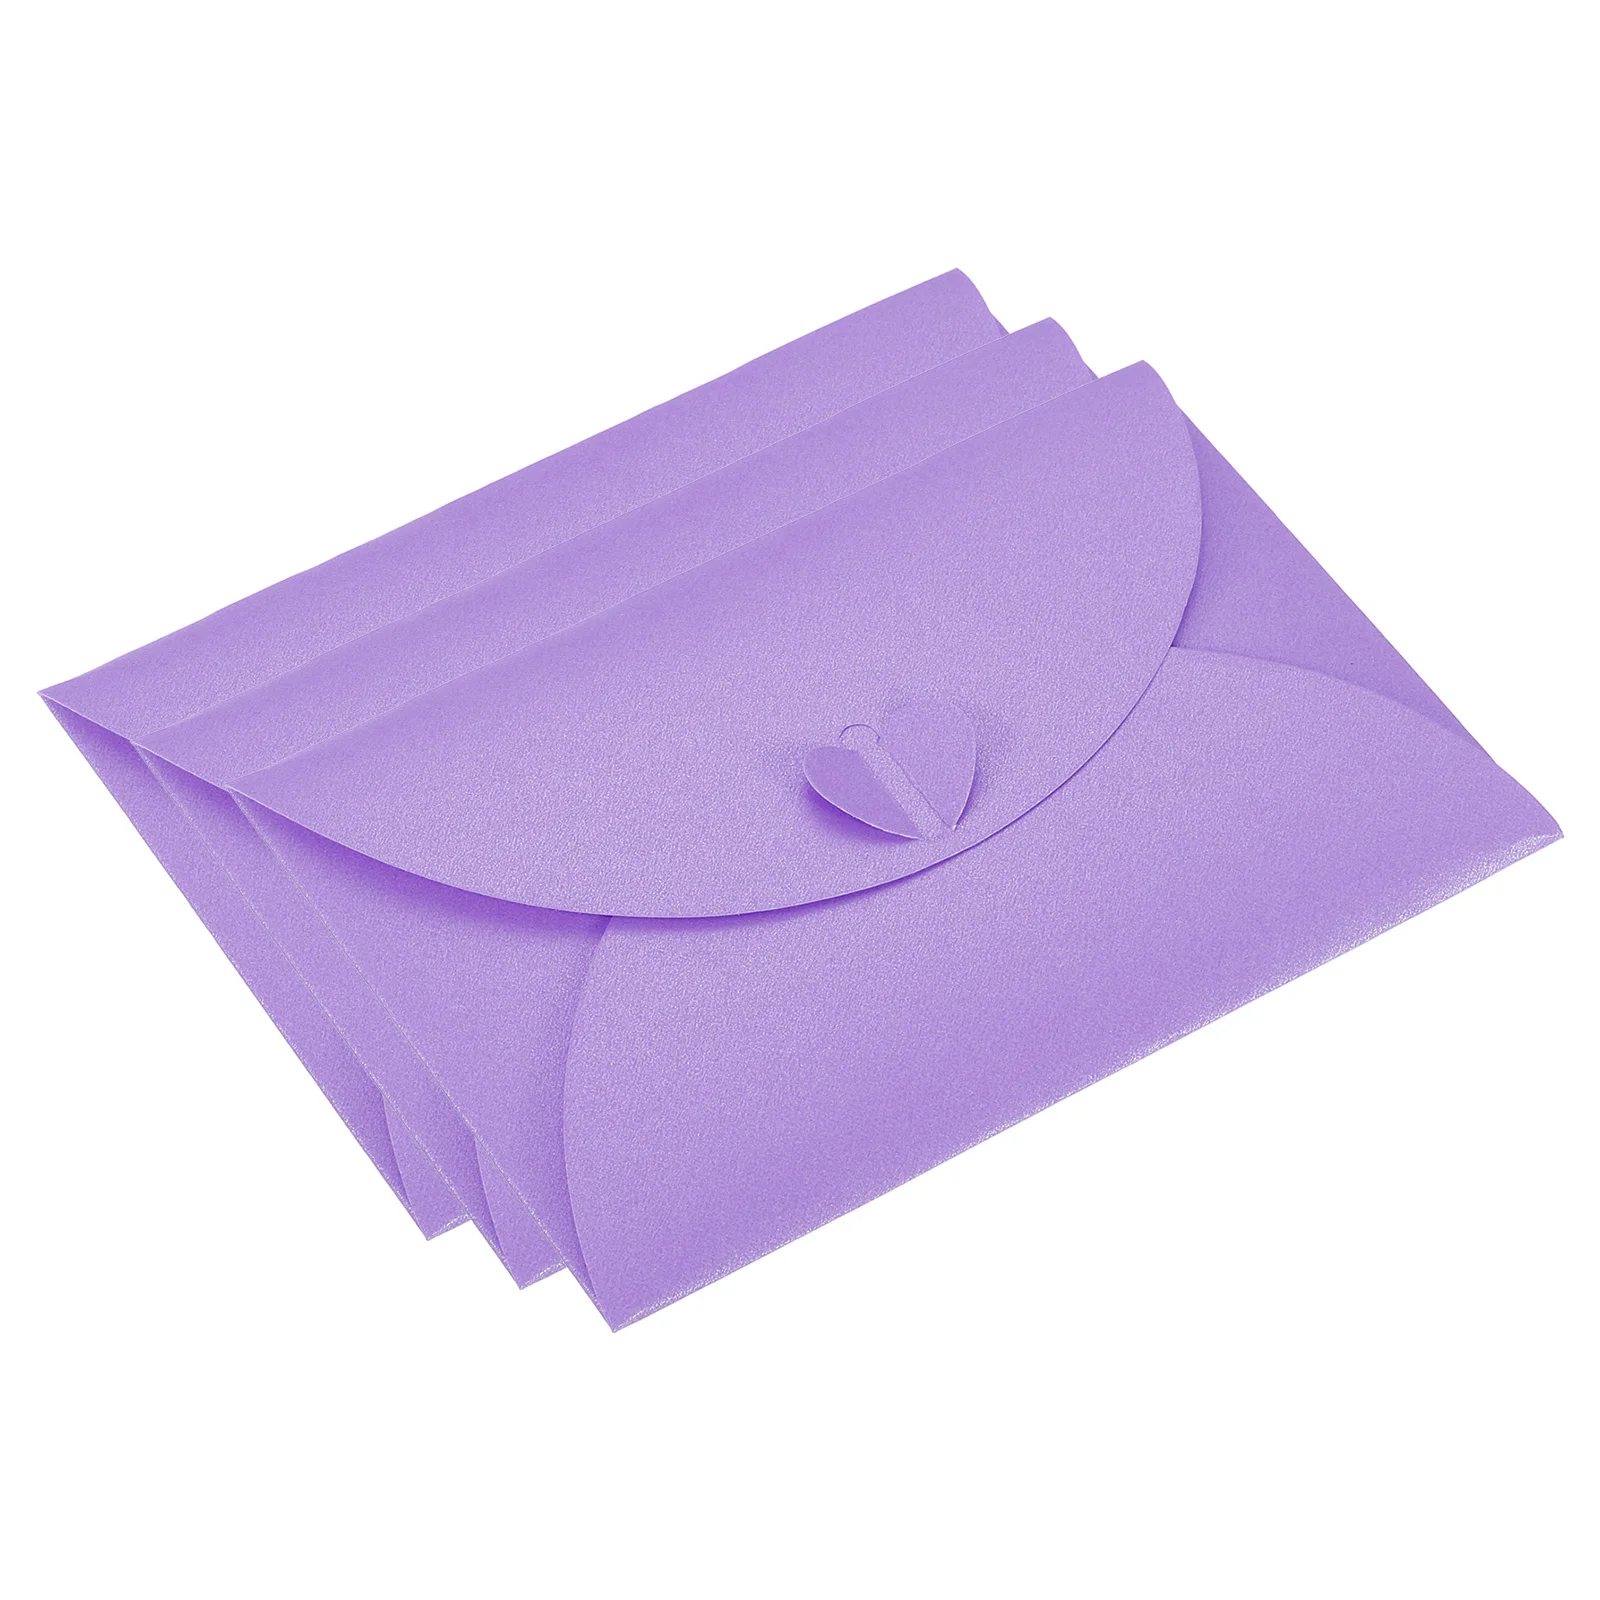 24/50Pc 15.5x10.5cm Mini Love Heart Pearlescent Paper Envelope Heart Shaped Clasp Photo Gift Card Envelopes for Wedding Greeting бумага для фотопринтера xiaomi instant photo paper 3